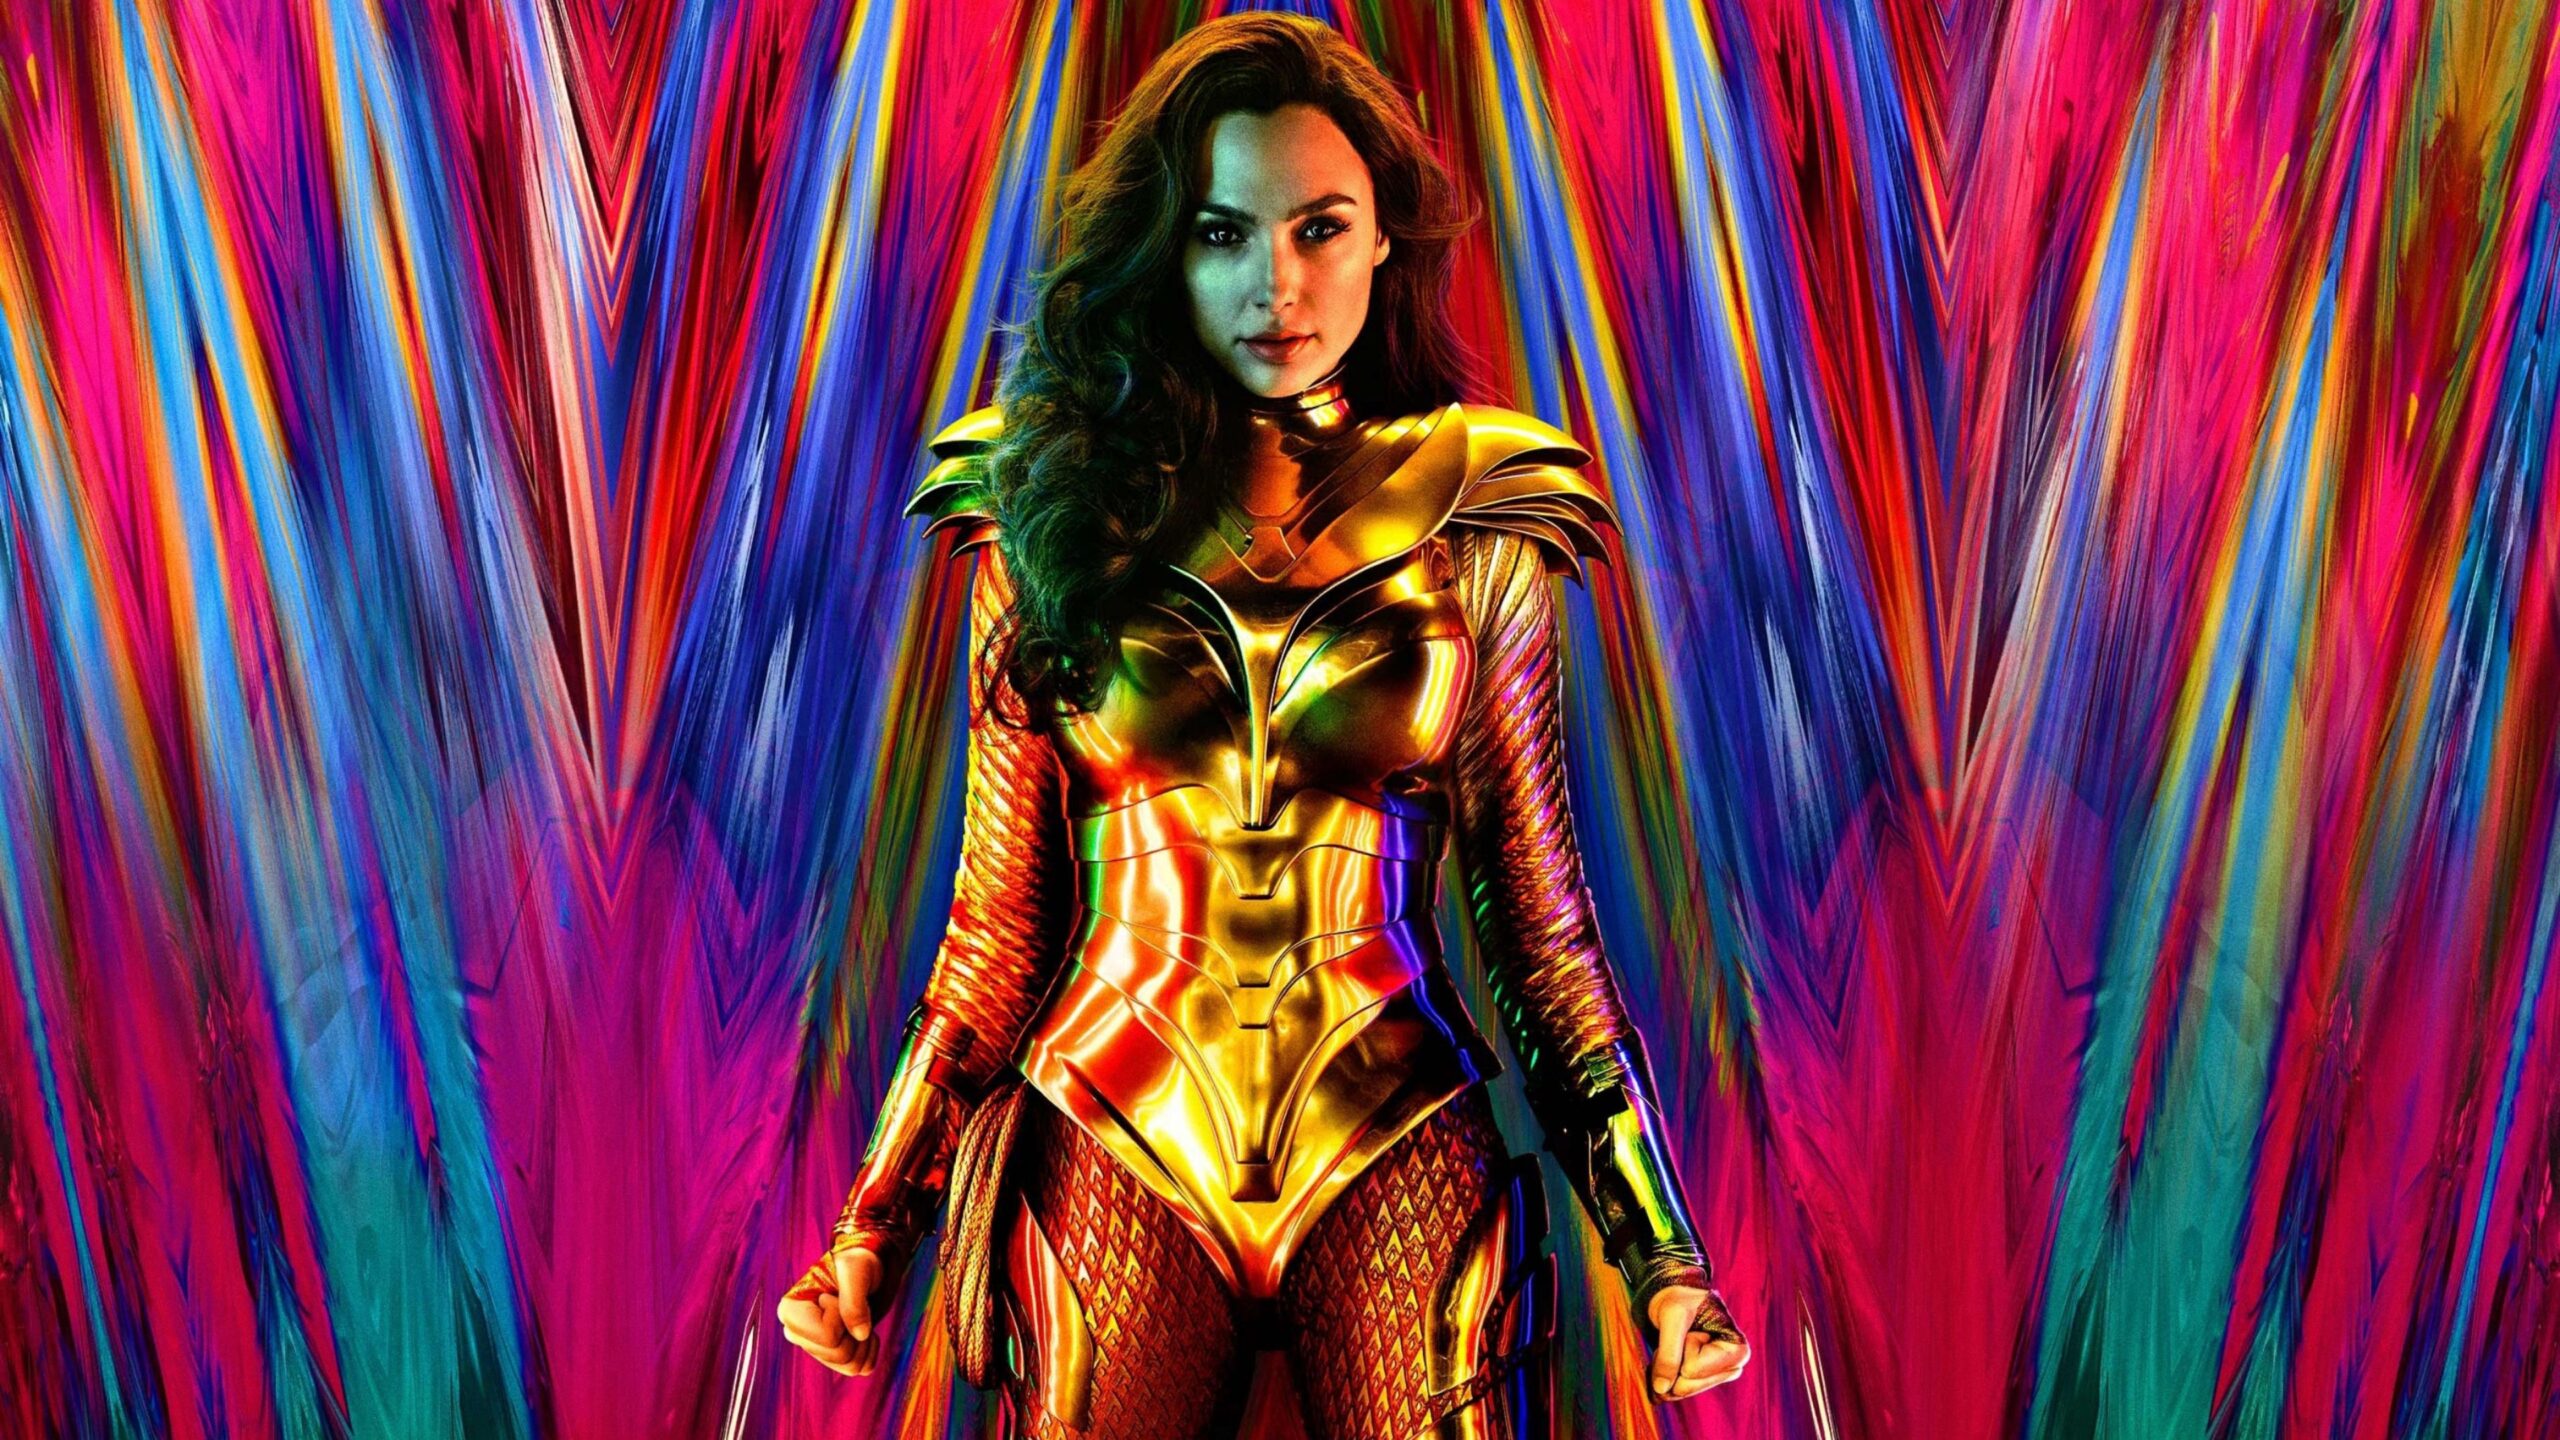 Wonder Woman Official Poster K Wallpaper, 2K Movies K Wallpapers, Wallpaper, Photos and Backgrounds